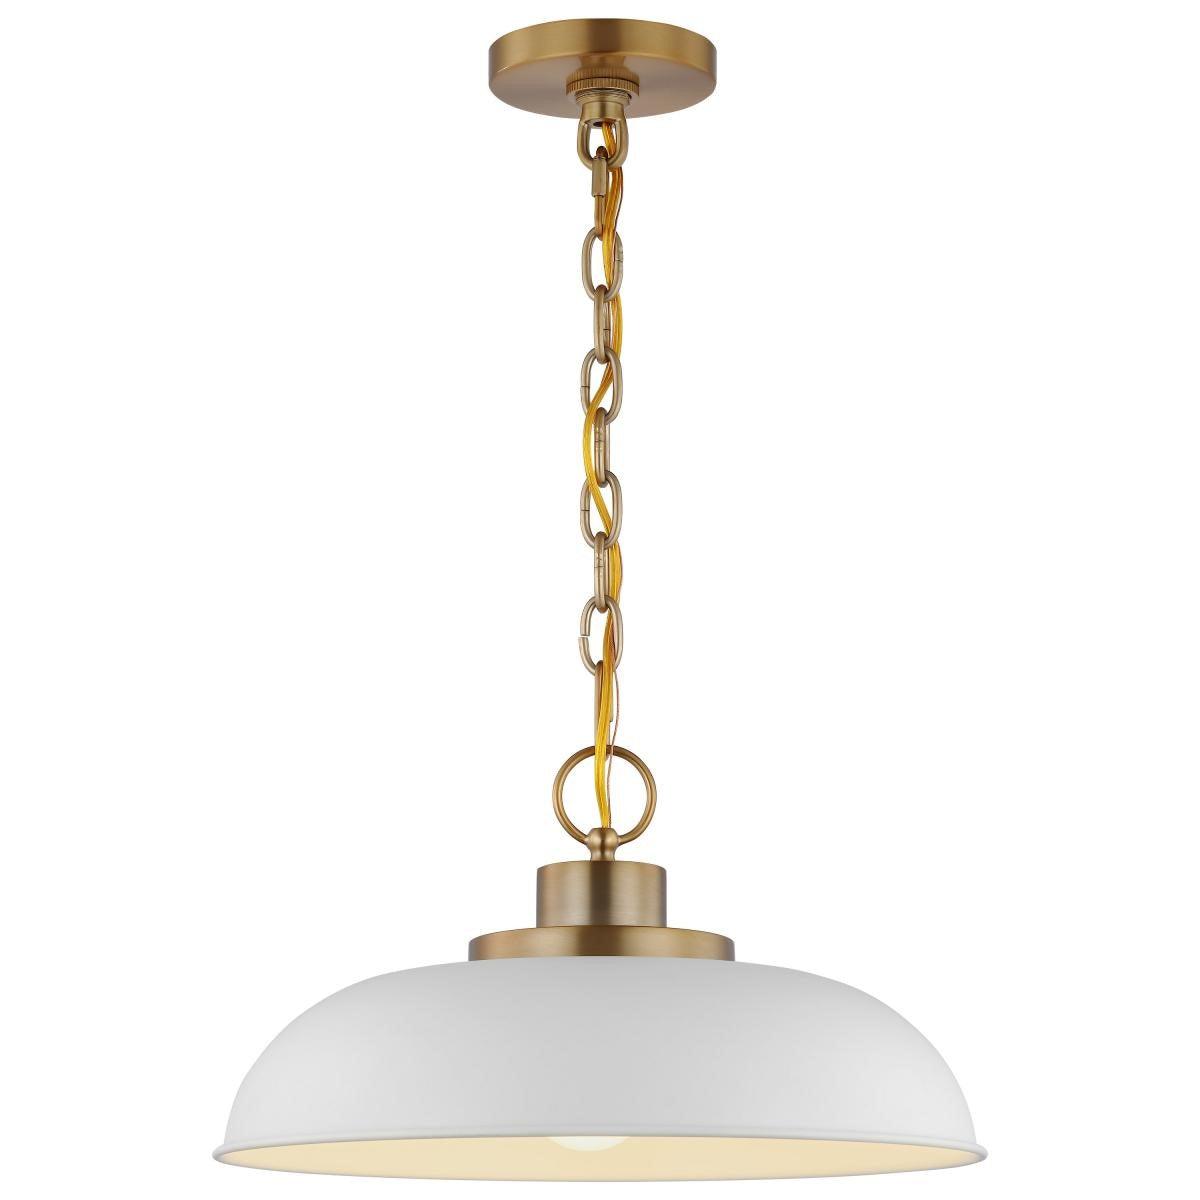 Colony 15 in. Pendant Light Matte White with Vintage Brass